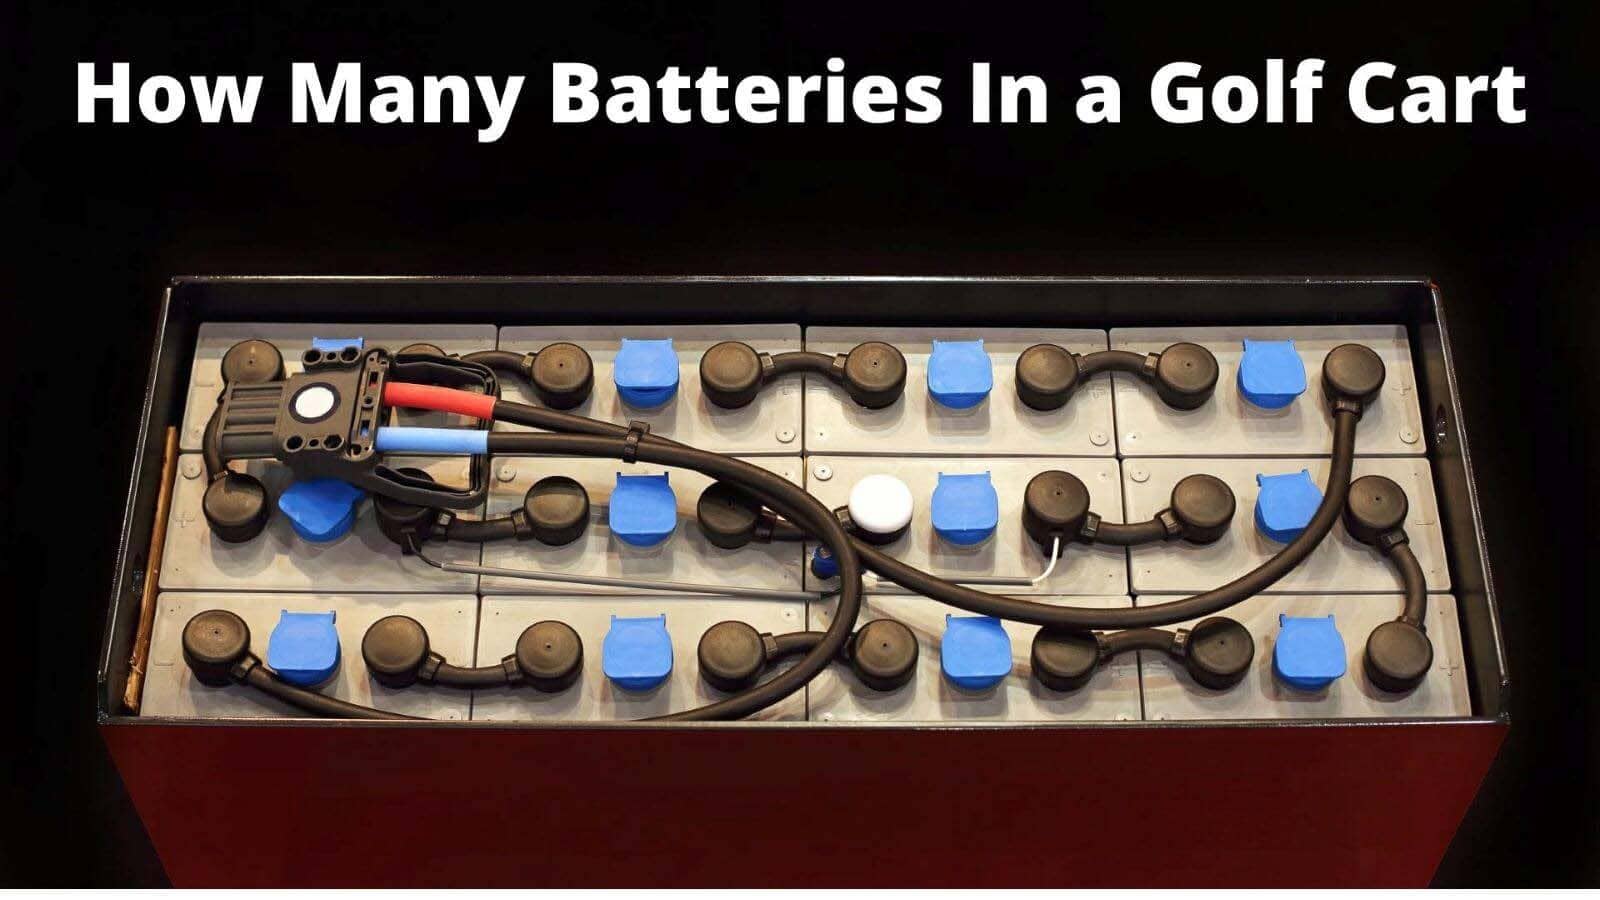 How Many Batteries in a Golf Cart